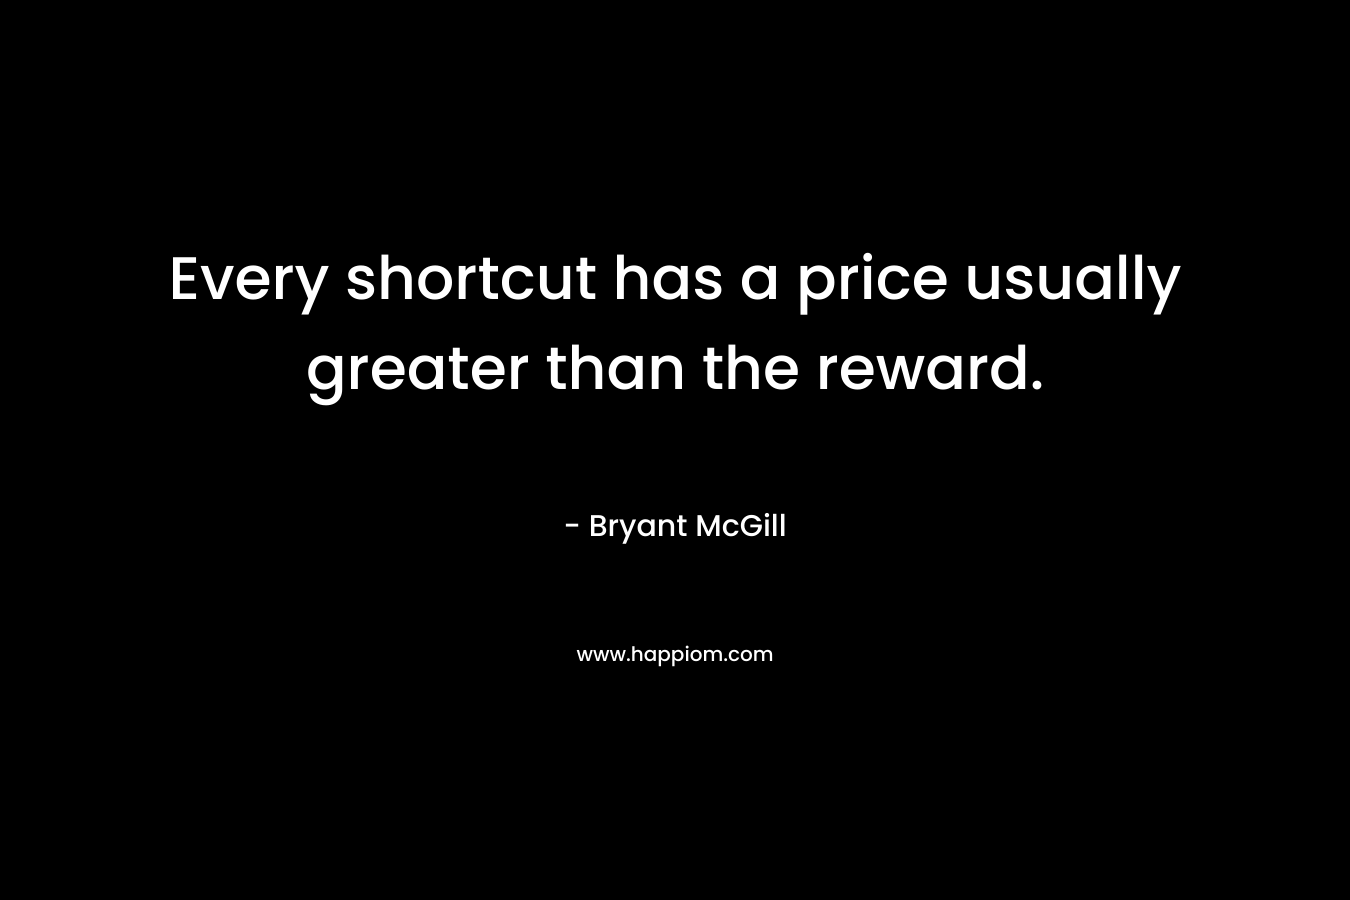 Every shortcut has a price usually greater than the reward.